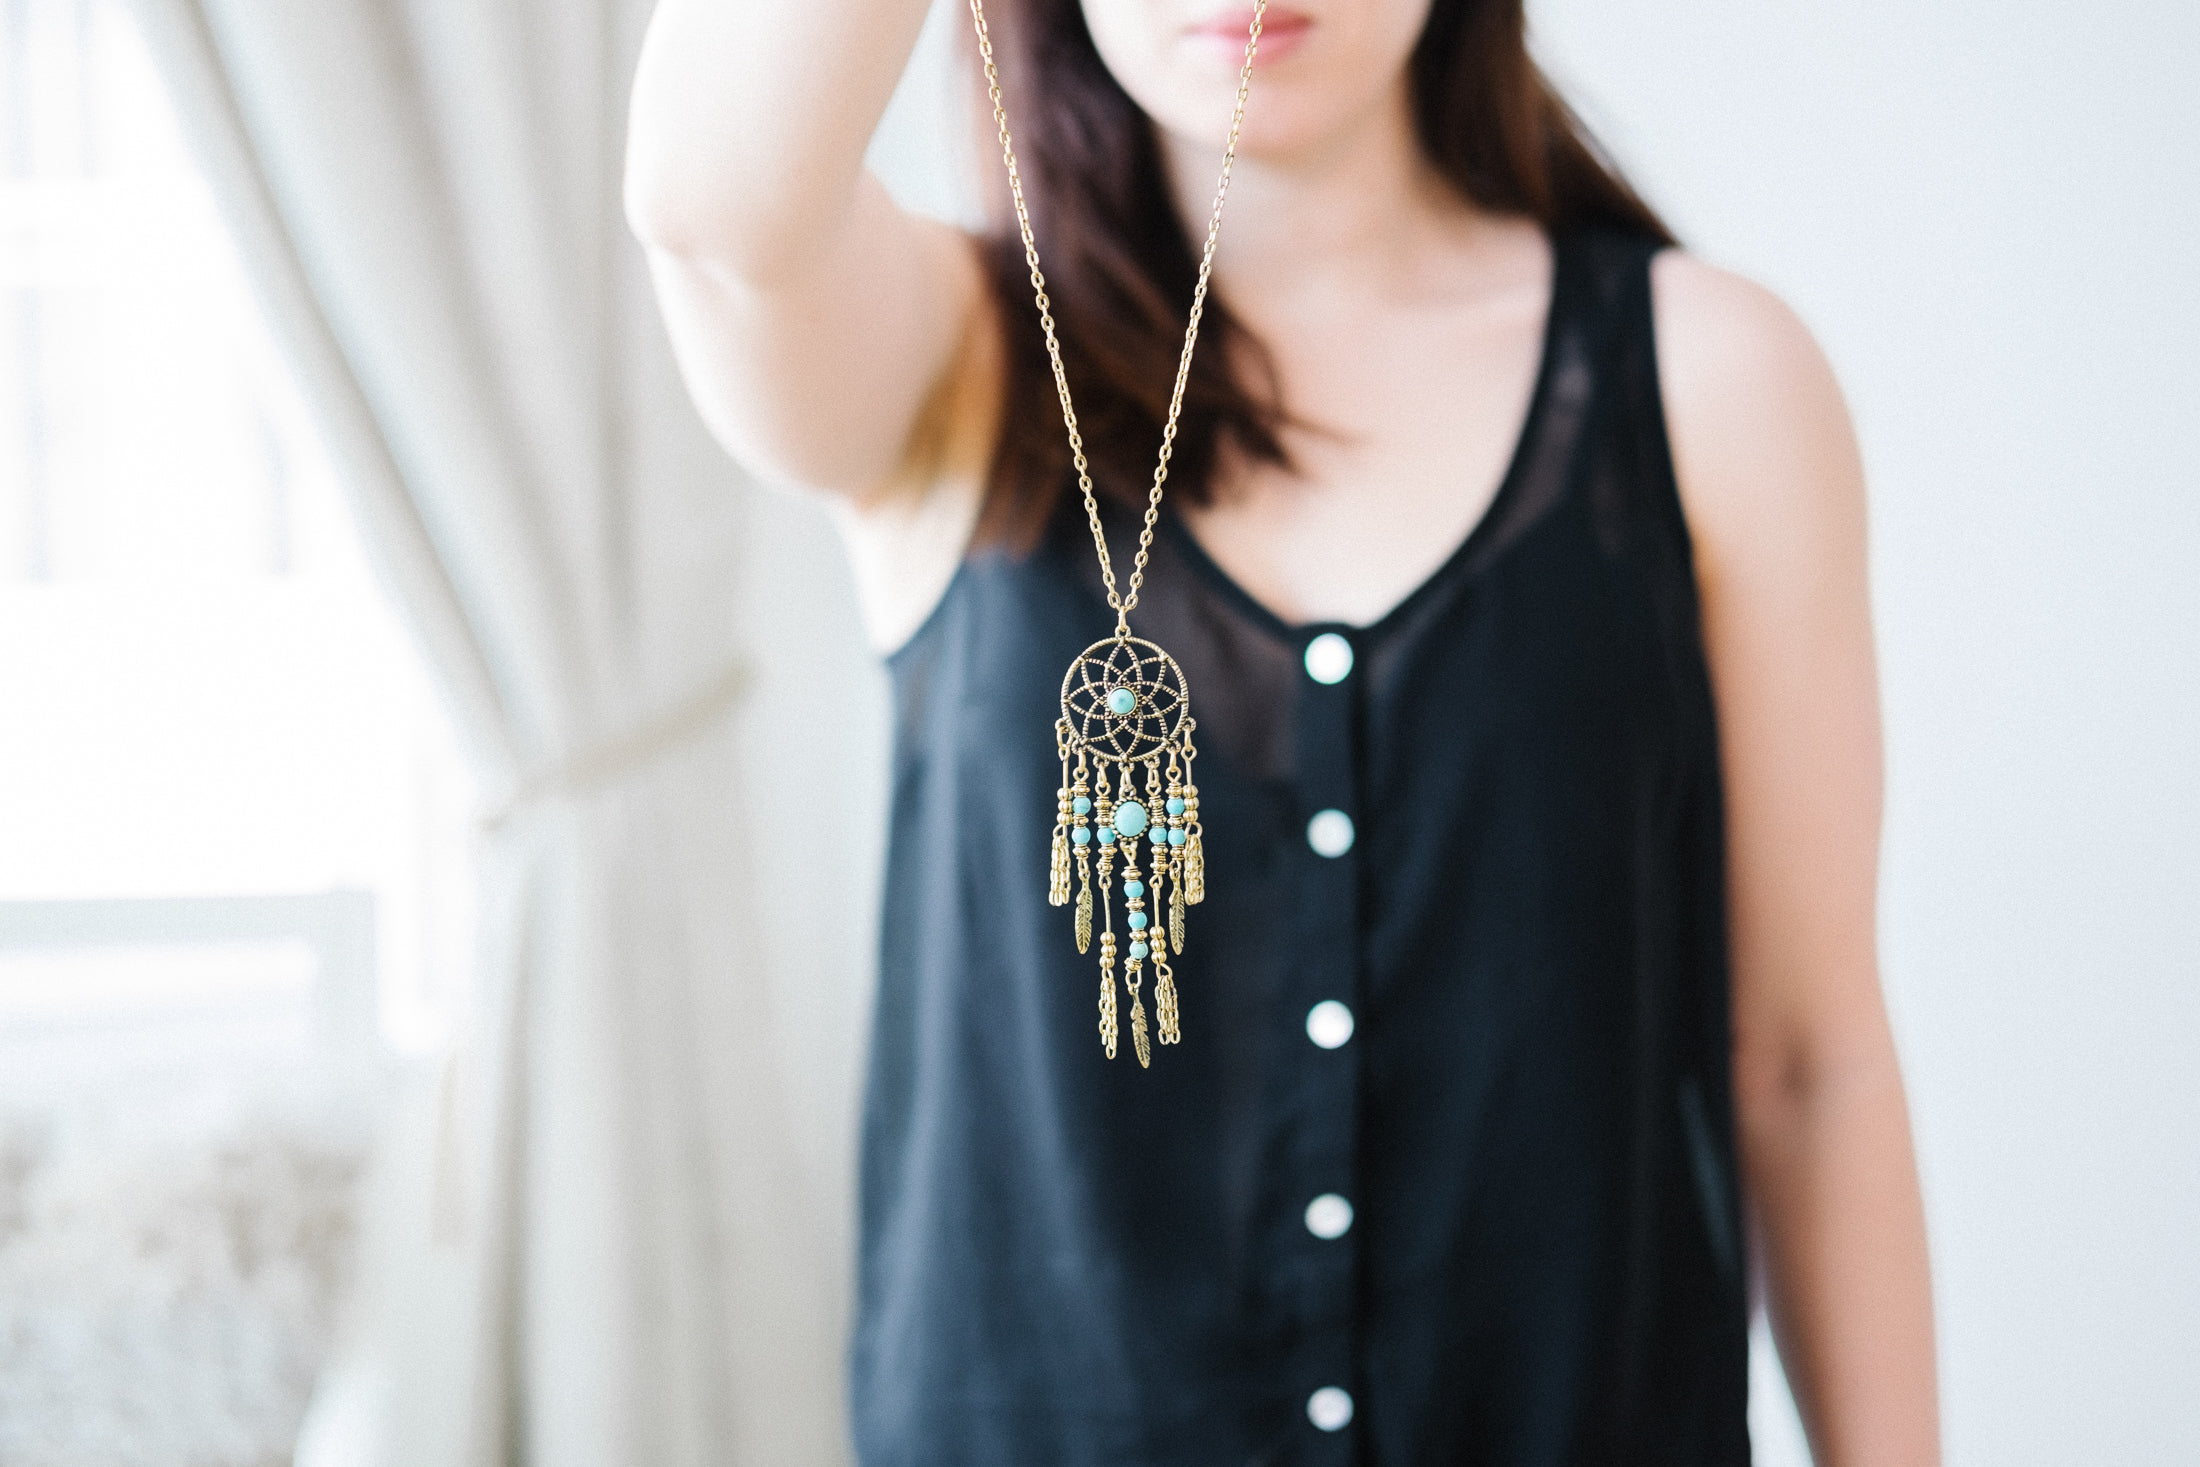 Buy blue dream catcher necklace for good vibes always - Carat Crush